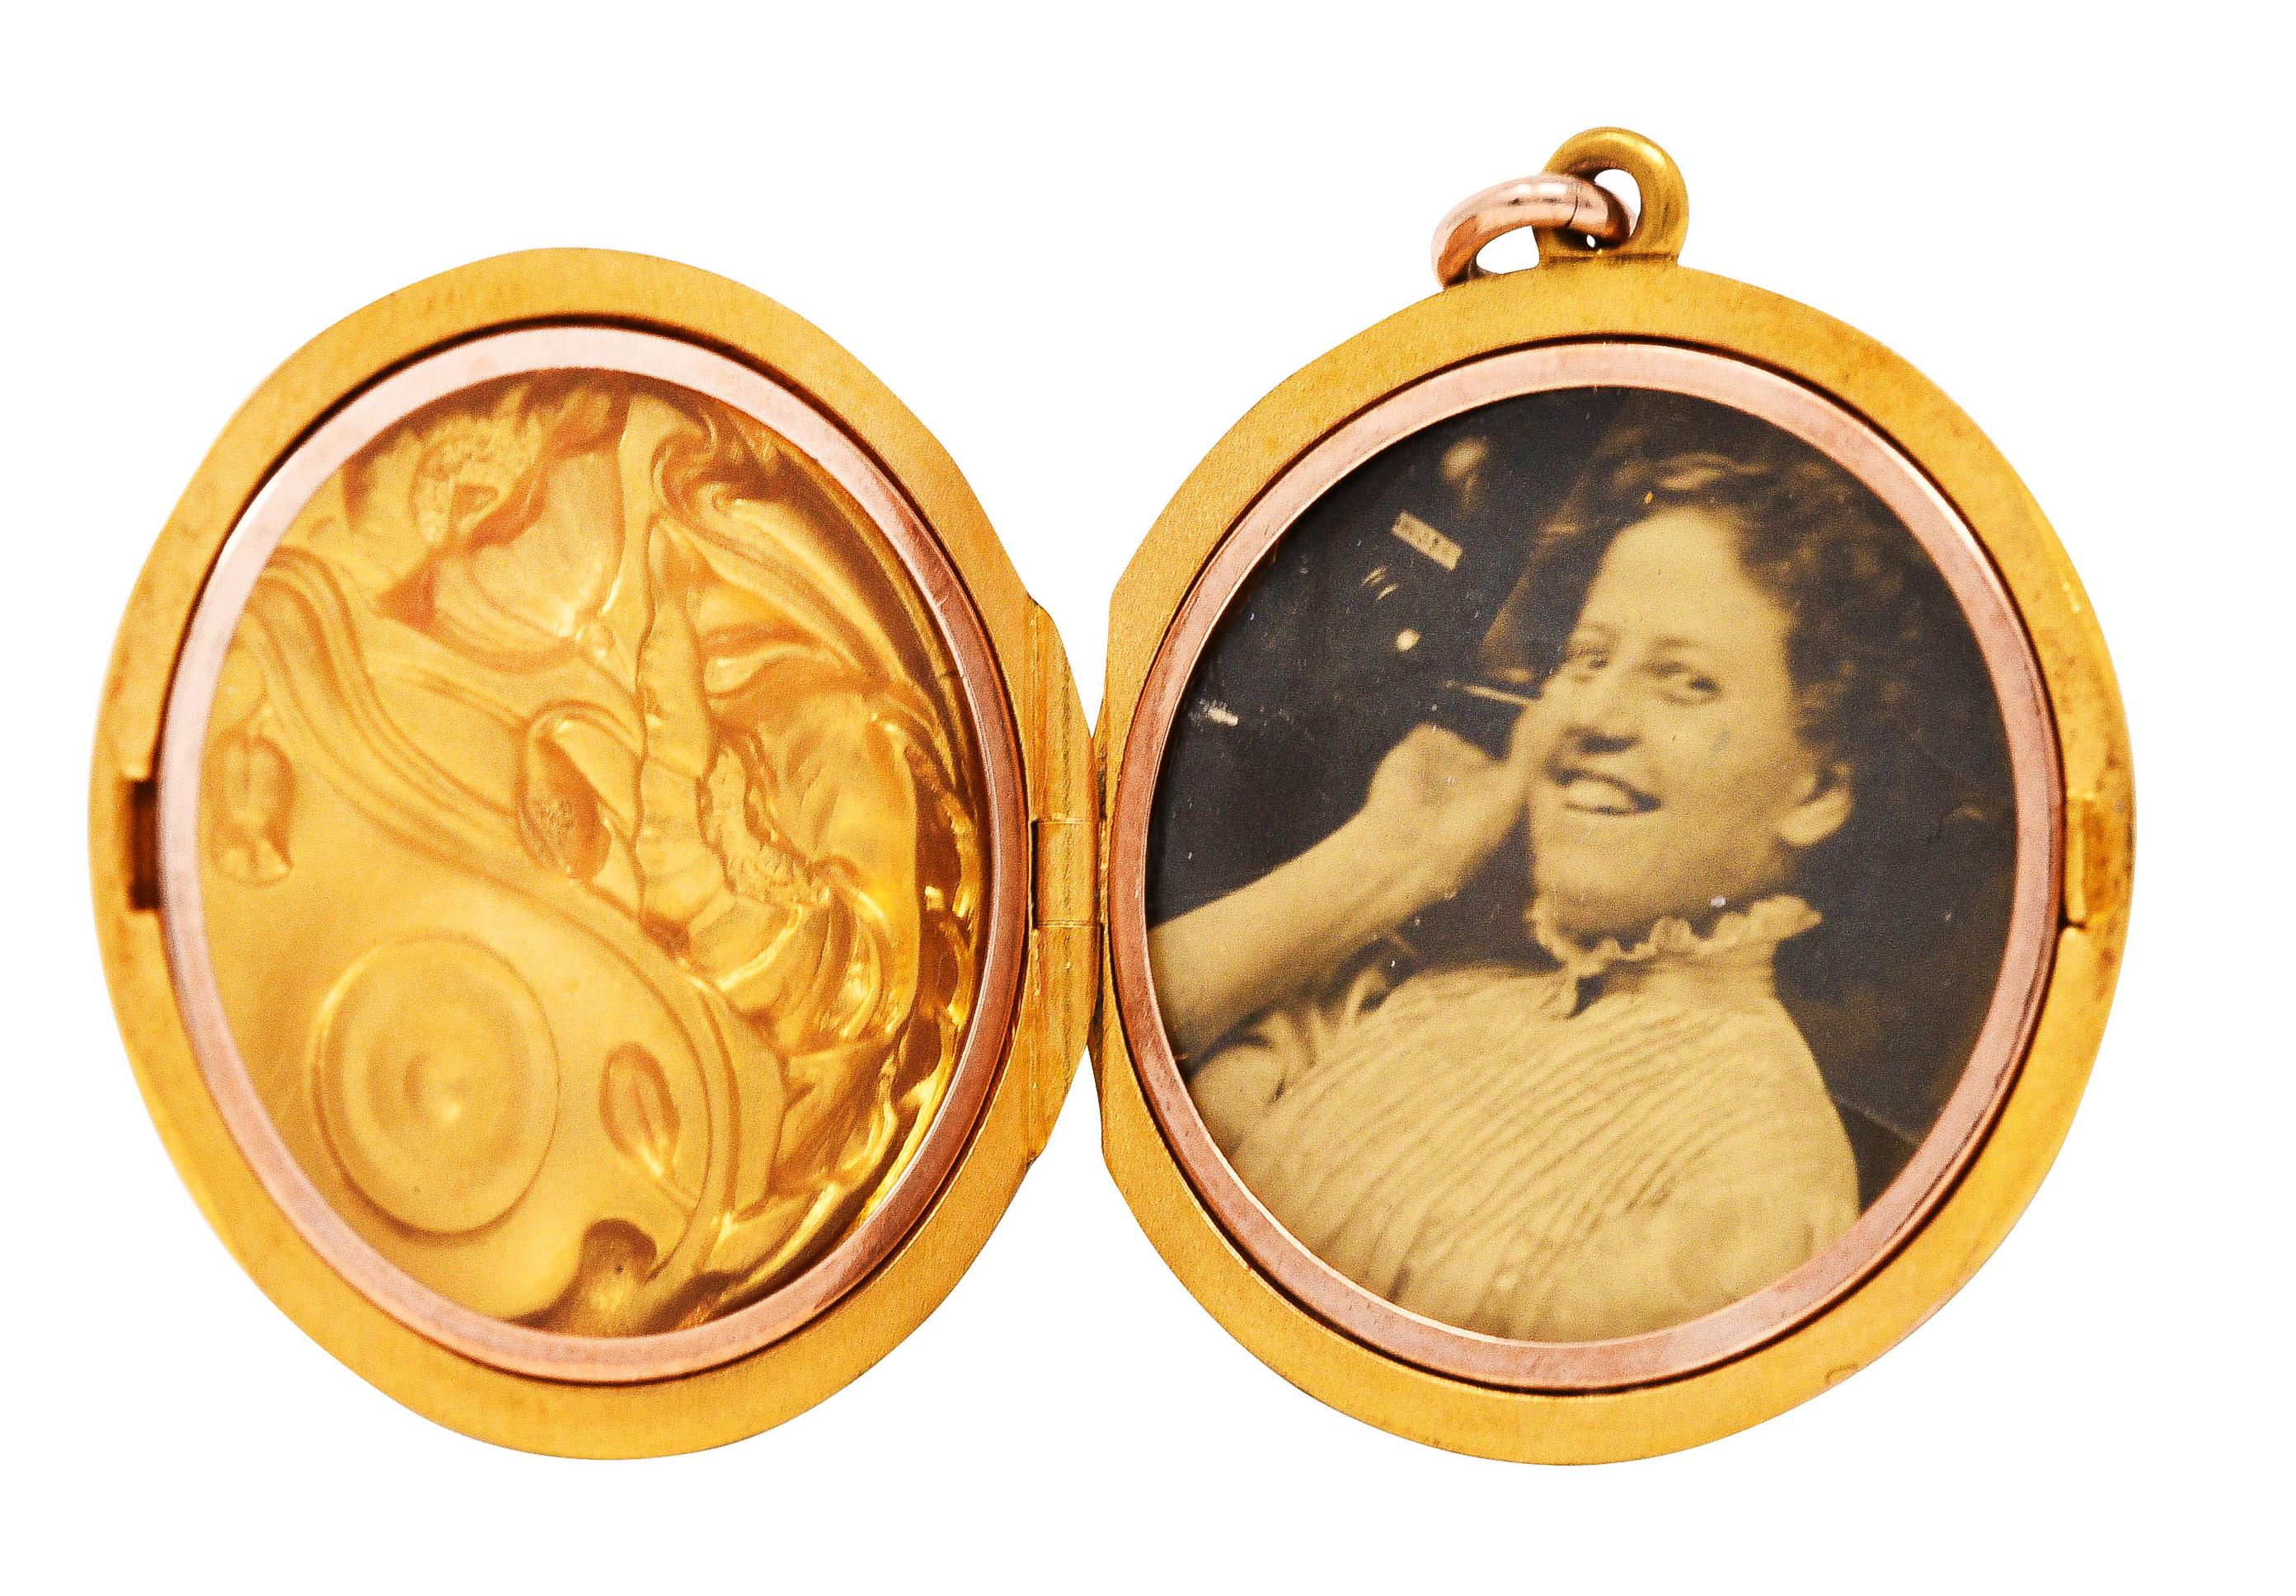 Circular locket features a repoussè rendering of stylized florals

Opens on a hinge to reveal two circular recesses with removable plastic covers

One side features a sepia portrait of a smiling Edwardian woman

Tested as 18 karat gold

Circa: